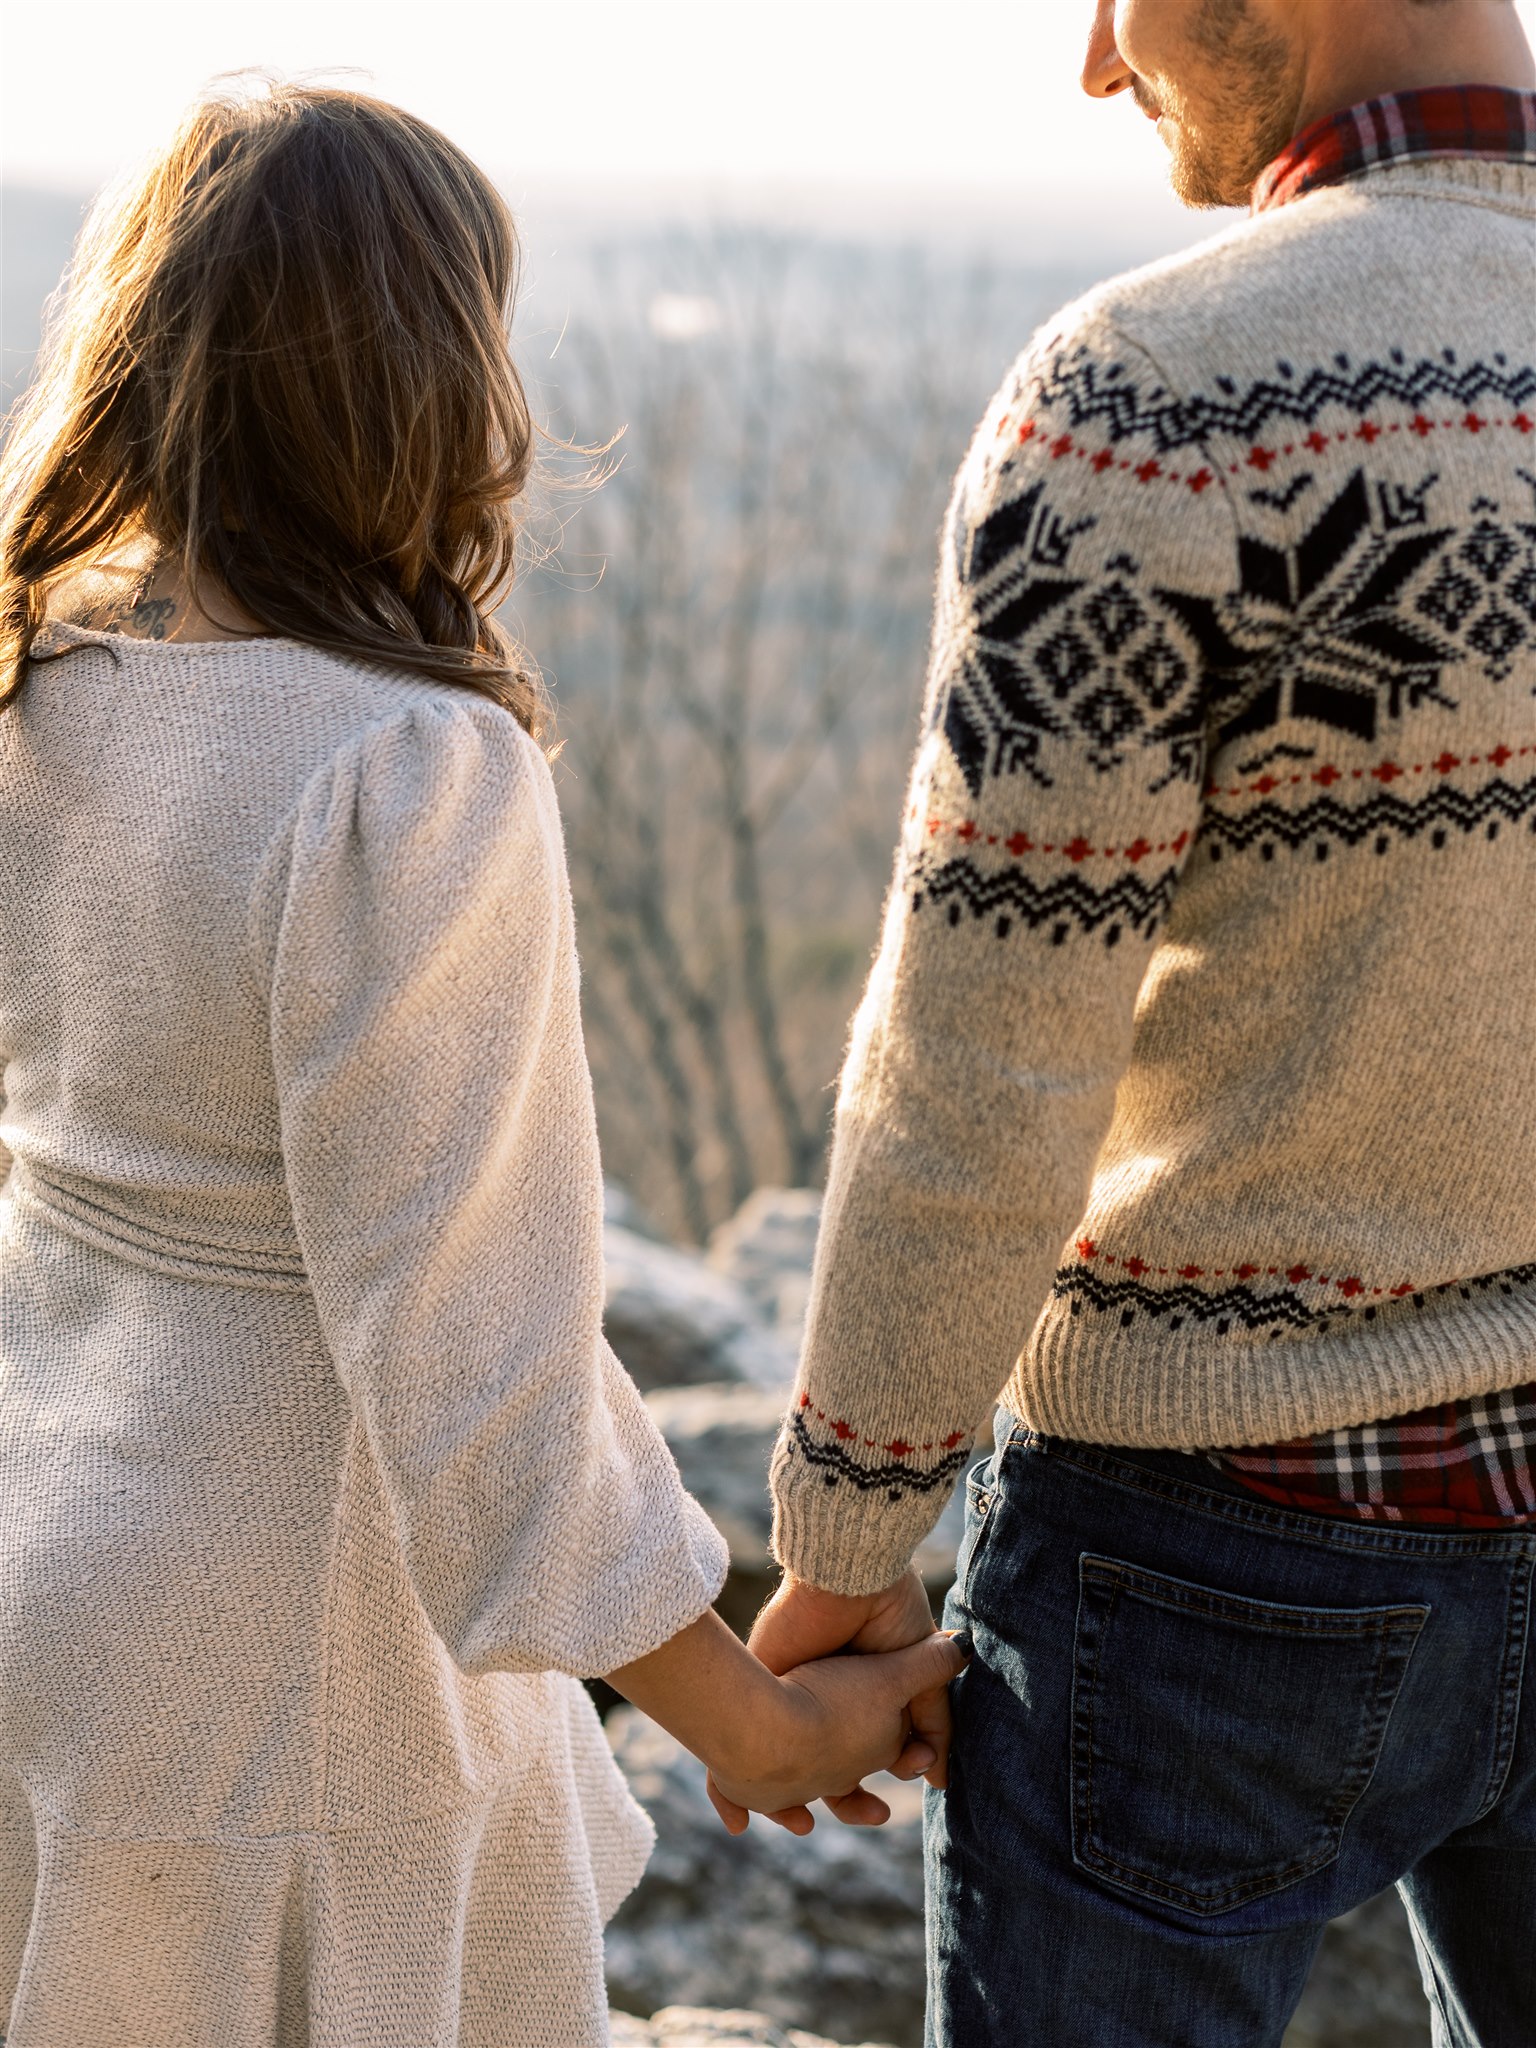 engaged couple holds hands during Christmas inspired engagement photos